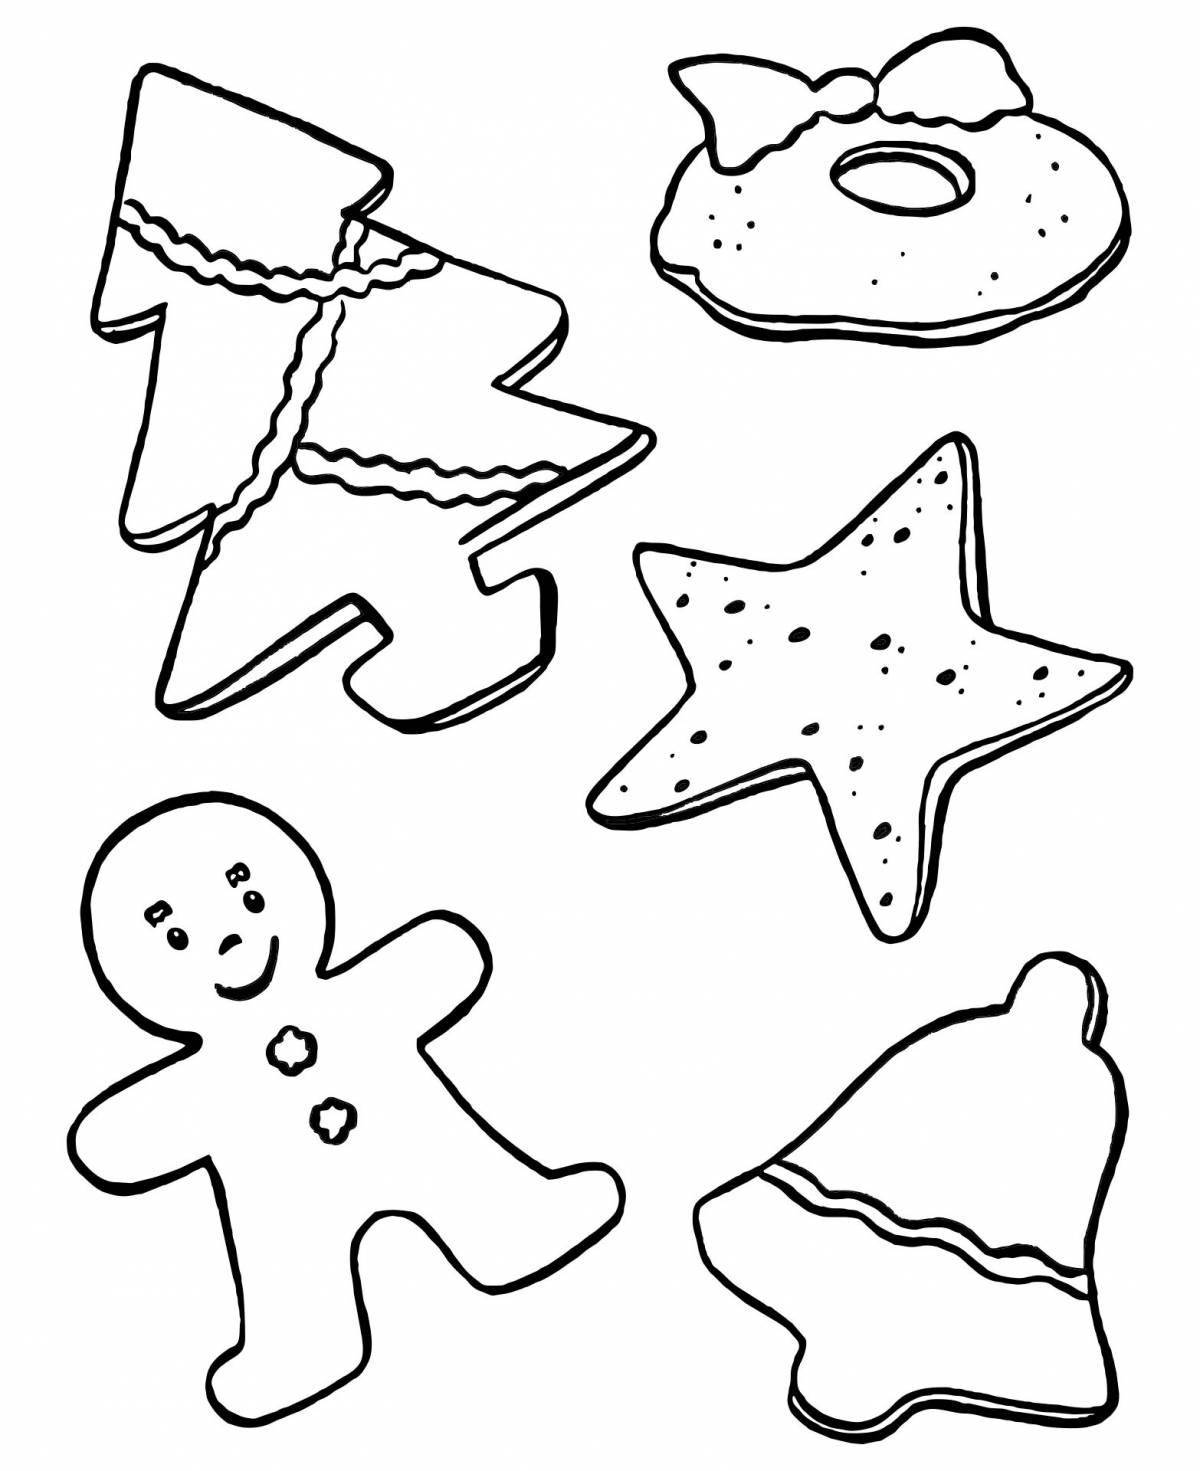 Gingerbread for kids #10